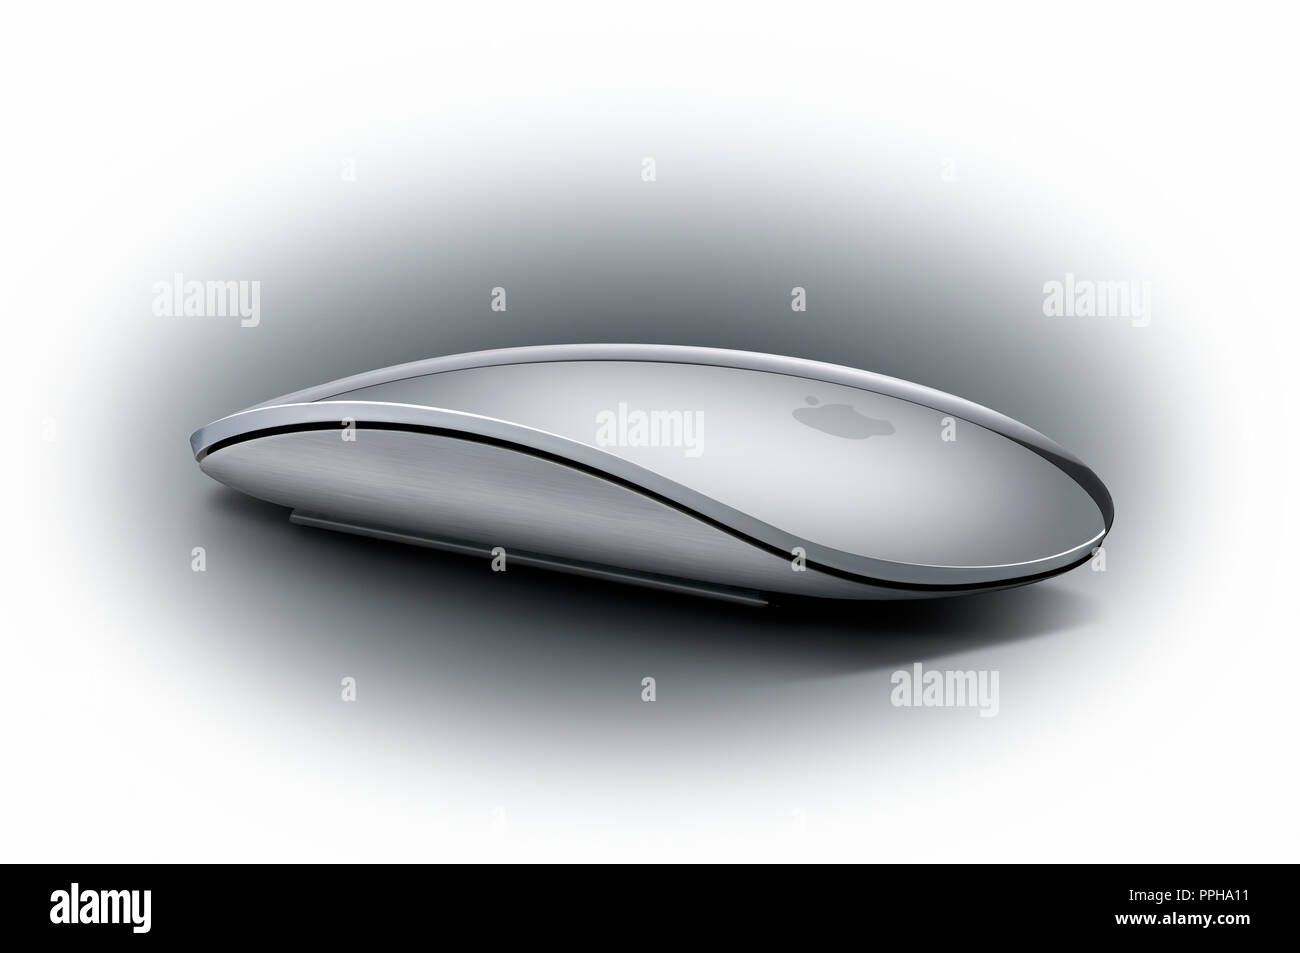 Weiß Silber Apple Computer Magic Mouse 2 Stockfoto